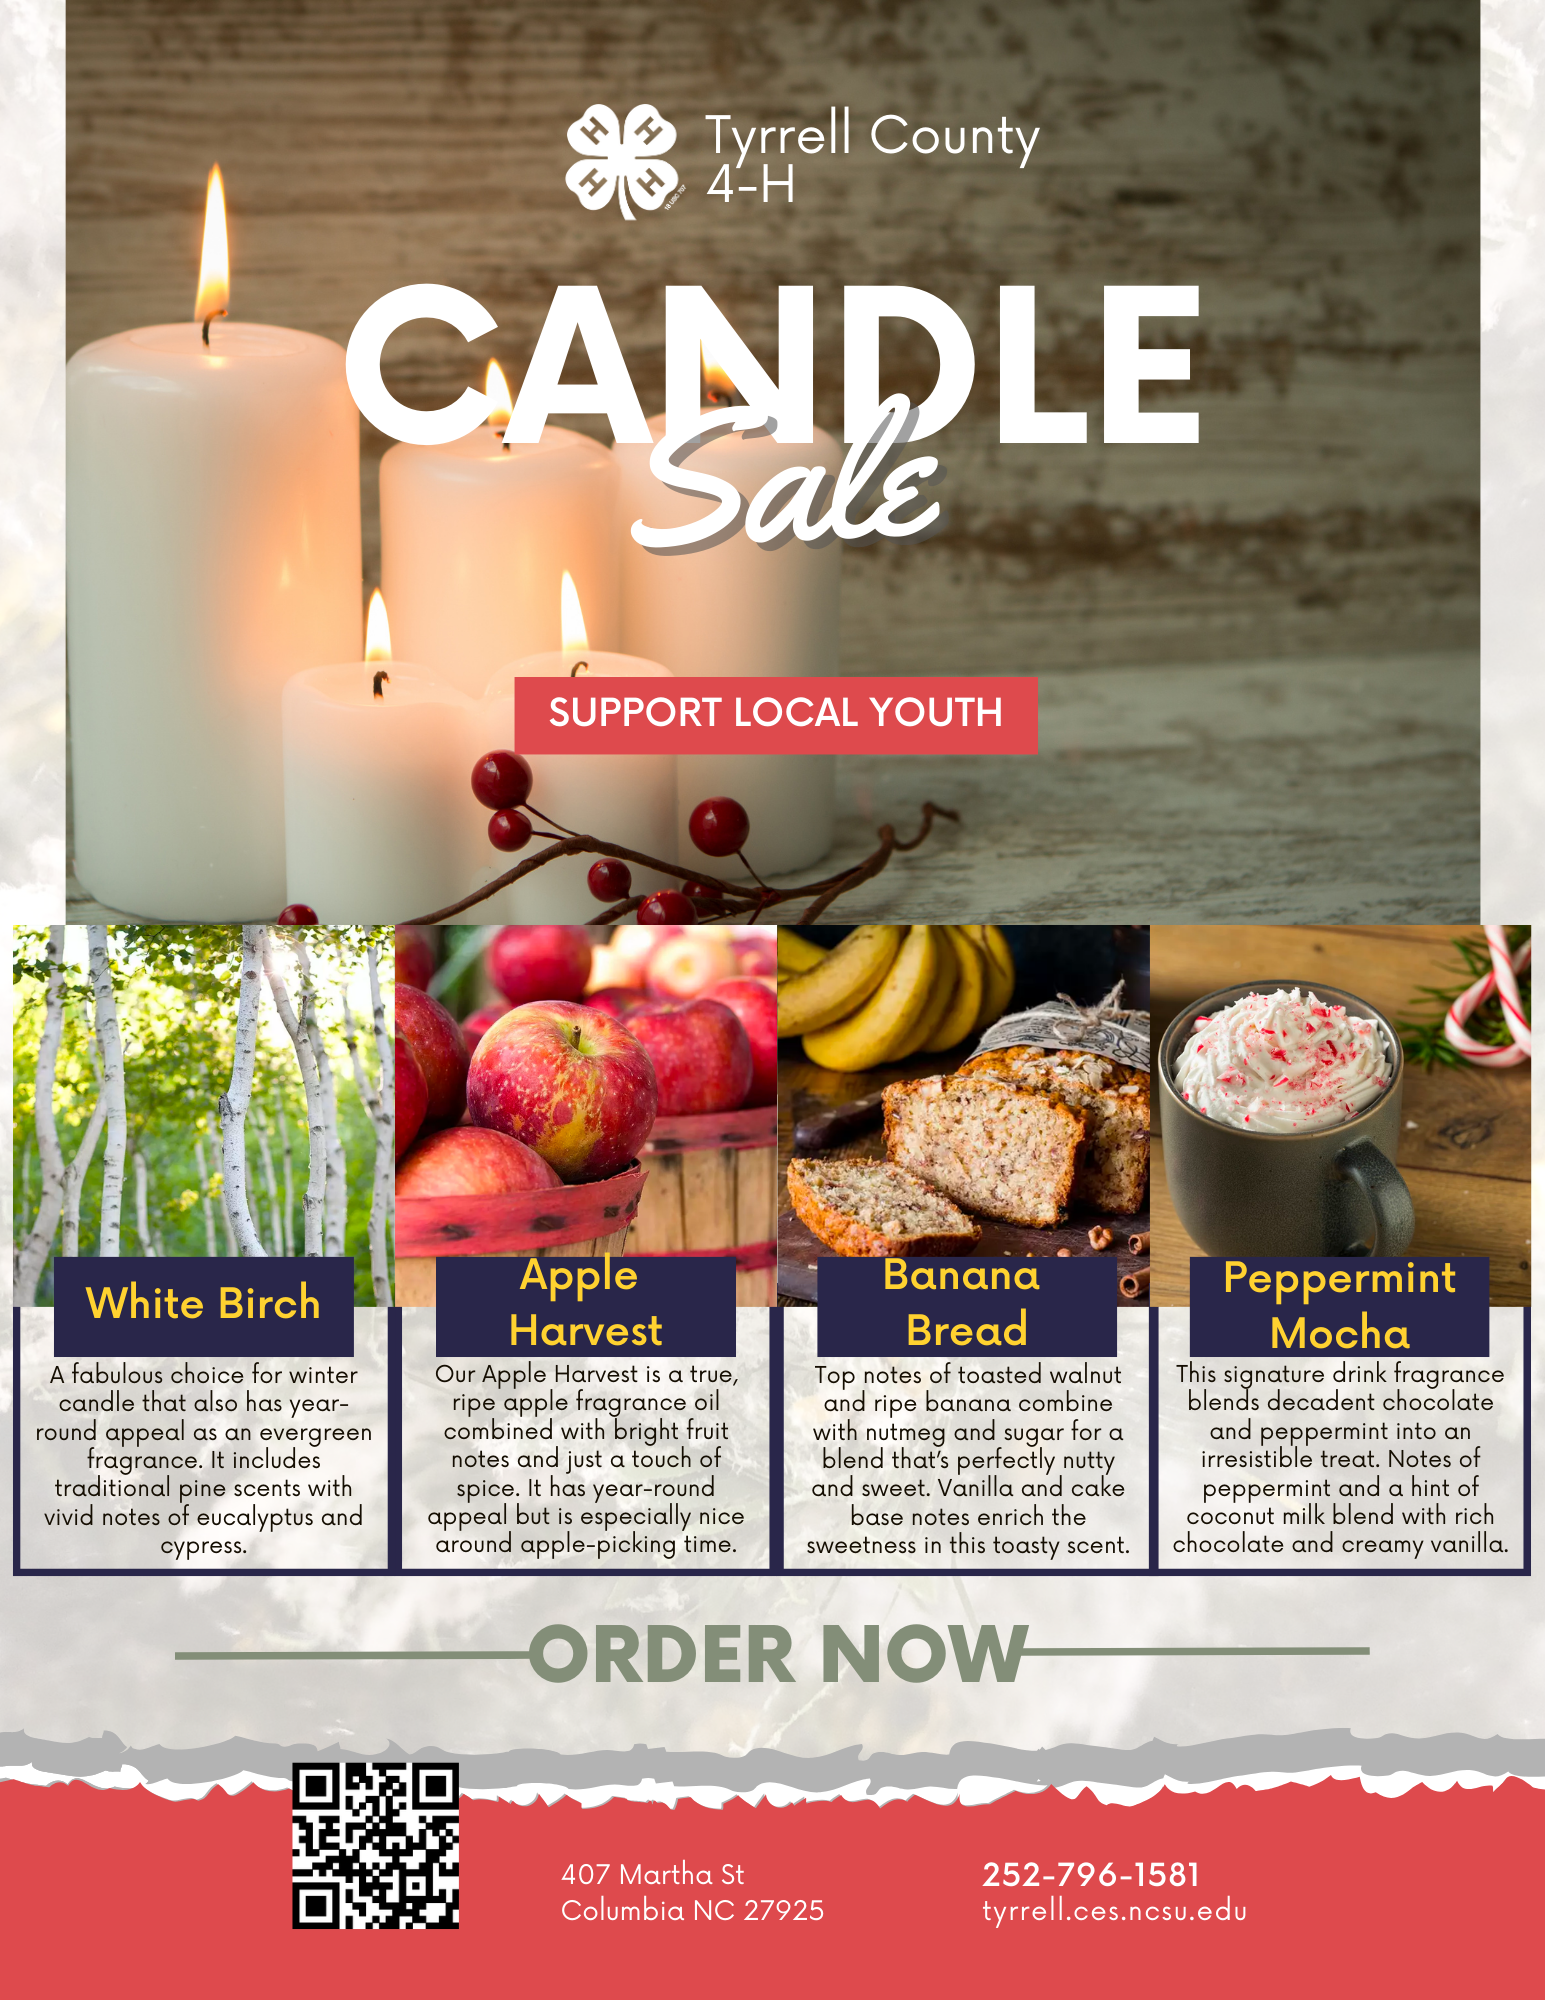 Candle Sale candle scent choices